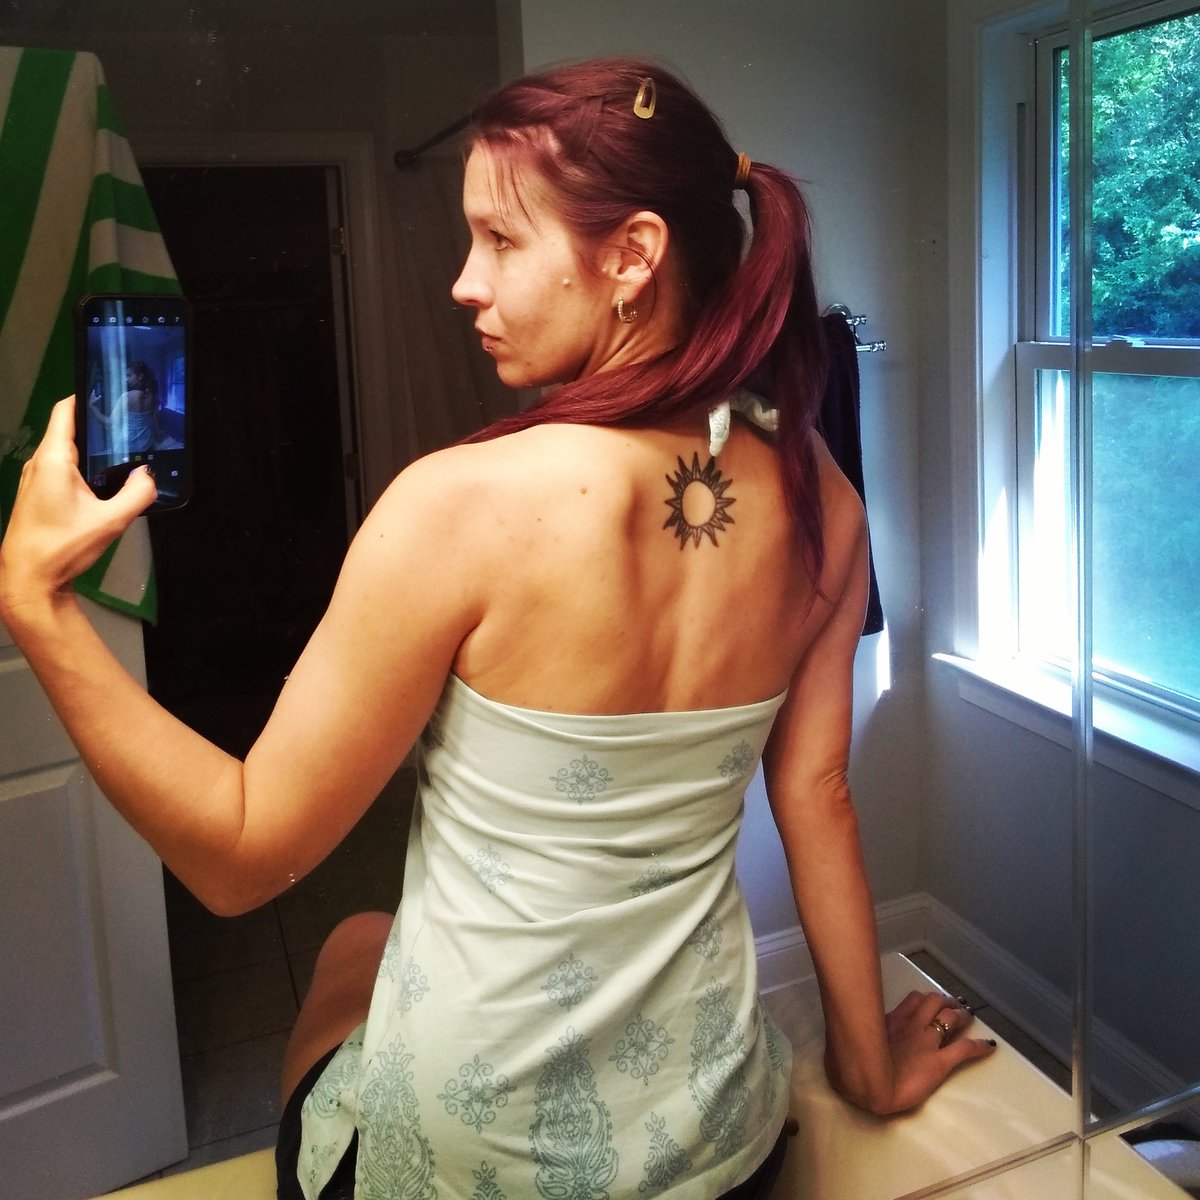 Here's hoping that being a #weirdo #nerd among #meangirls in middle school will even somewhat prepare me for raising a #preteen and then #teen girl 
#purplehairdontcare #gotinked 15 years ago #shesonlyeight #sendhelp #middleschoolsucked #finallyembracingme #sassfordays #tattoo